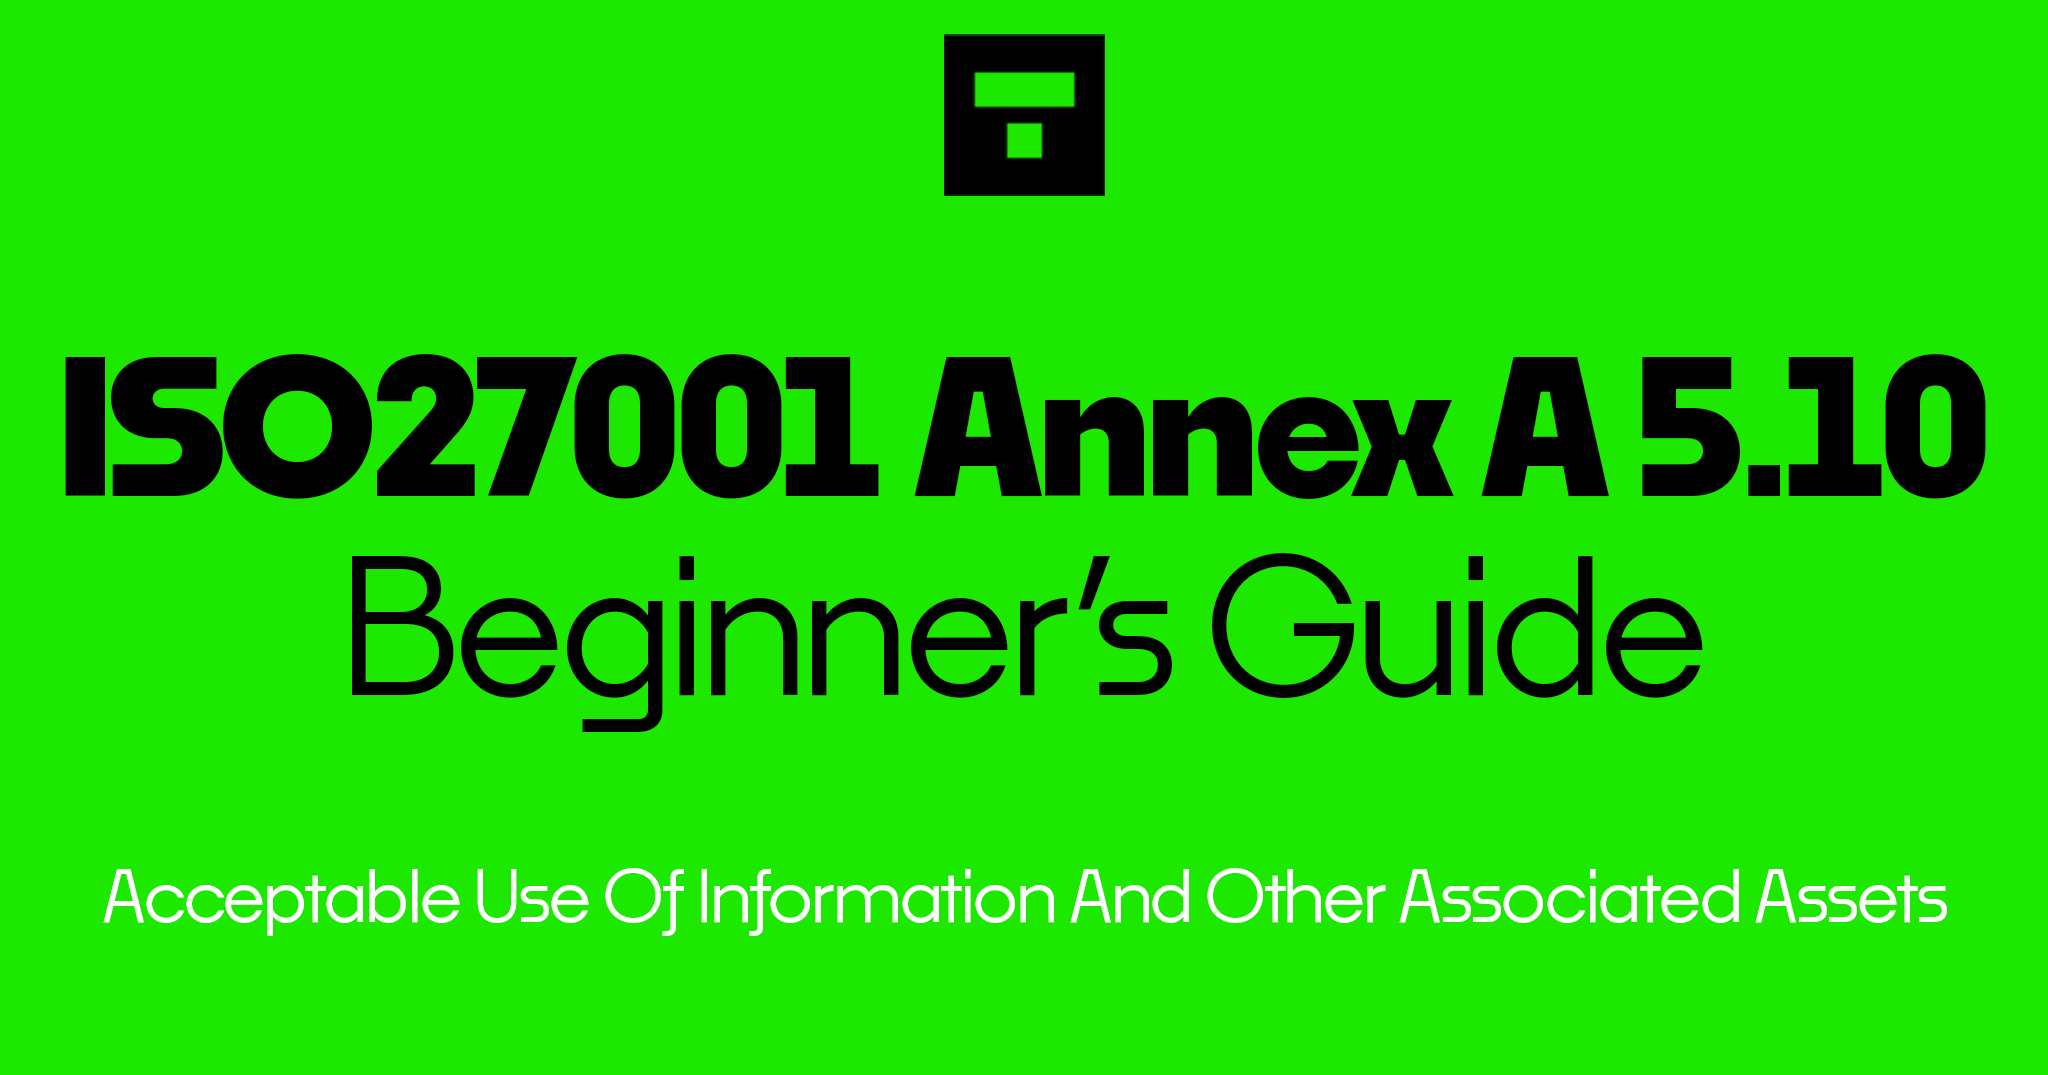 ISO 27001 Annex A 5.10 Acceptable Use Of Information And Other Associated Assets Beginner’s Guide